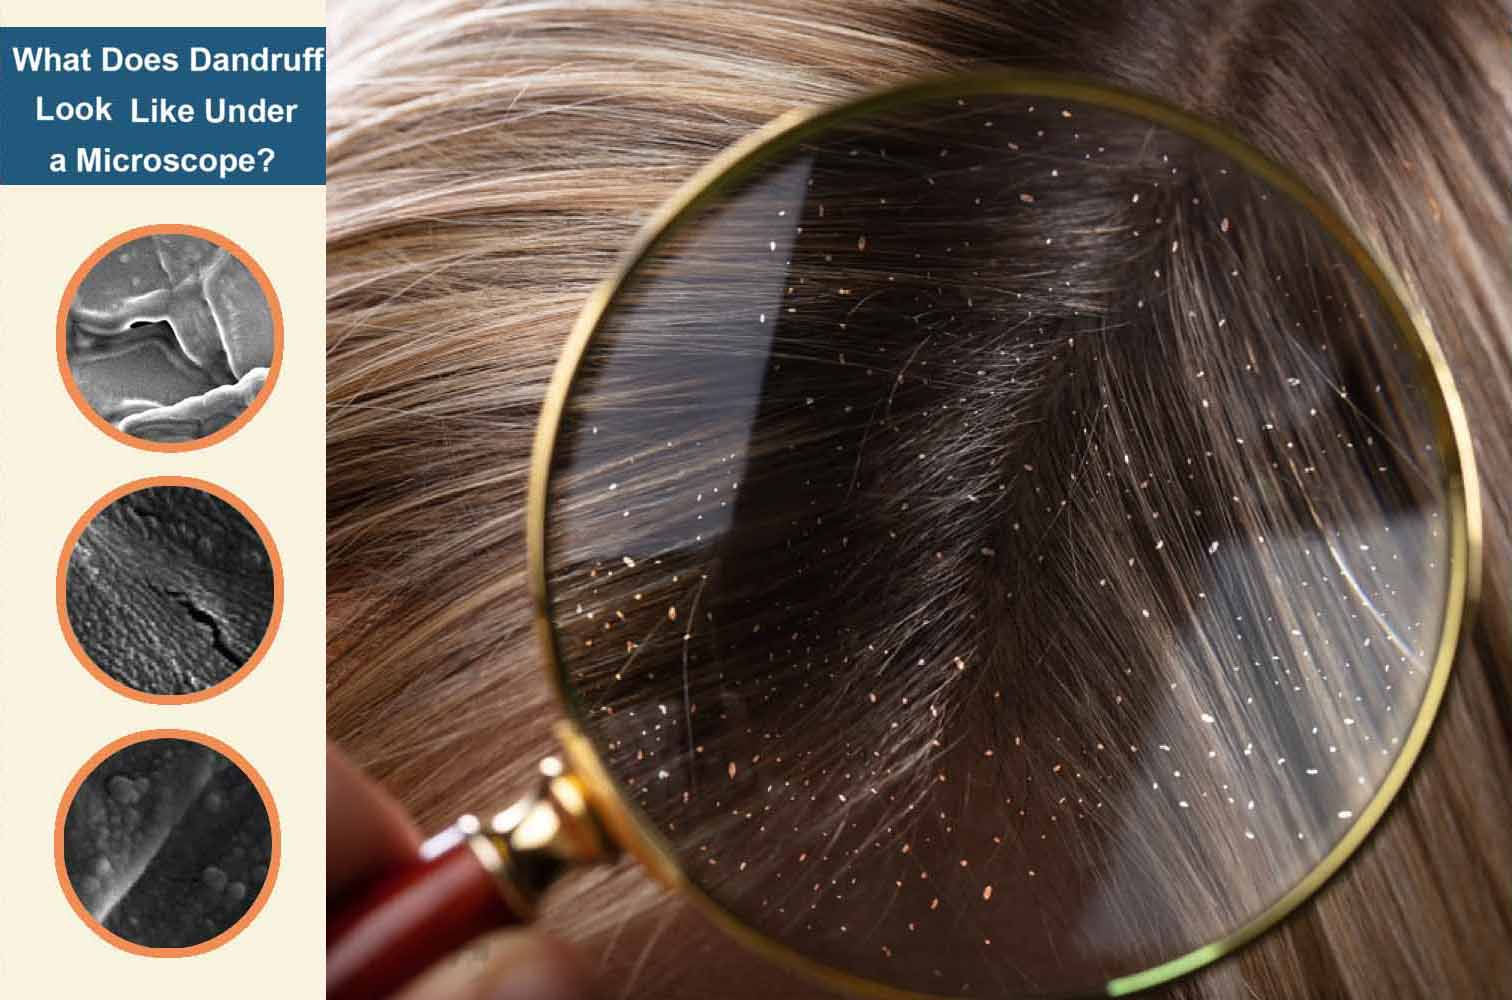 How Does Dandruff Look Under a Microscope?